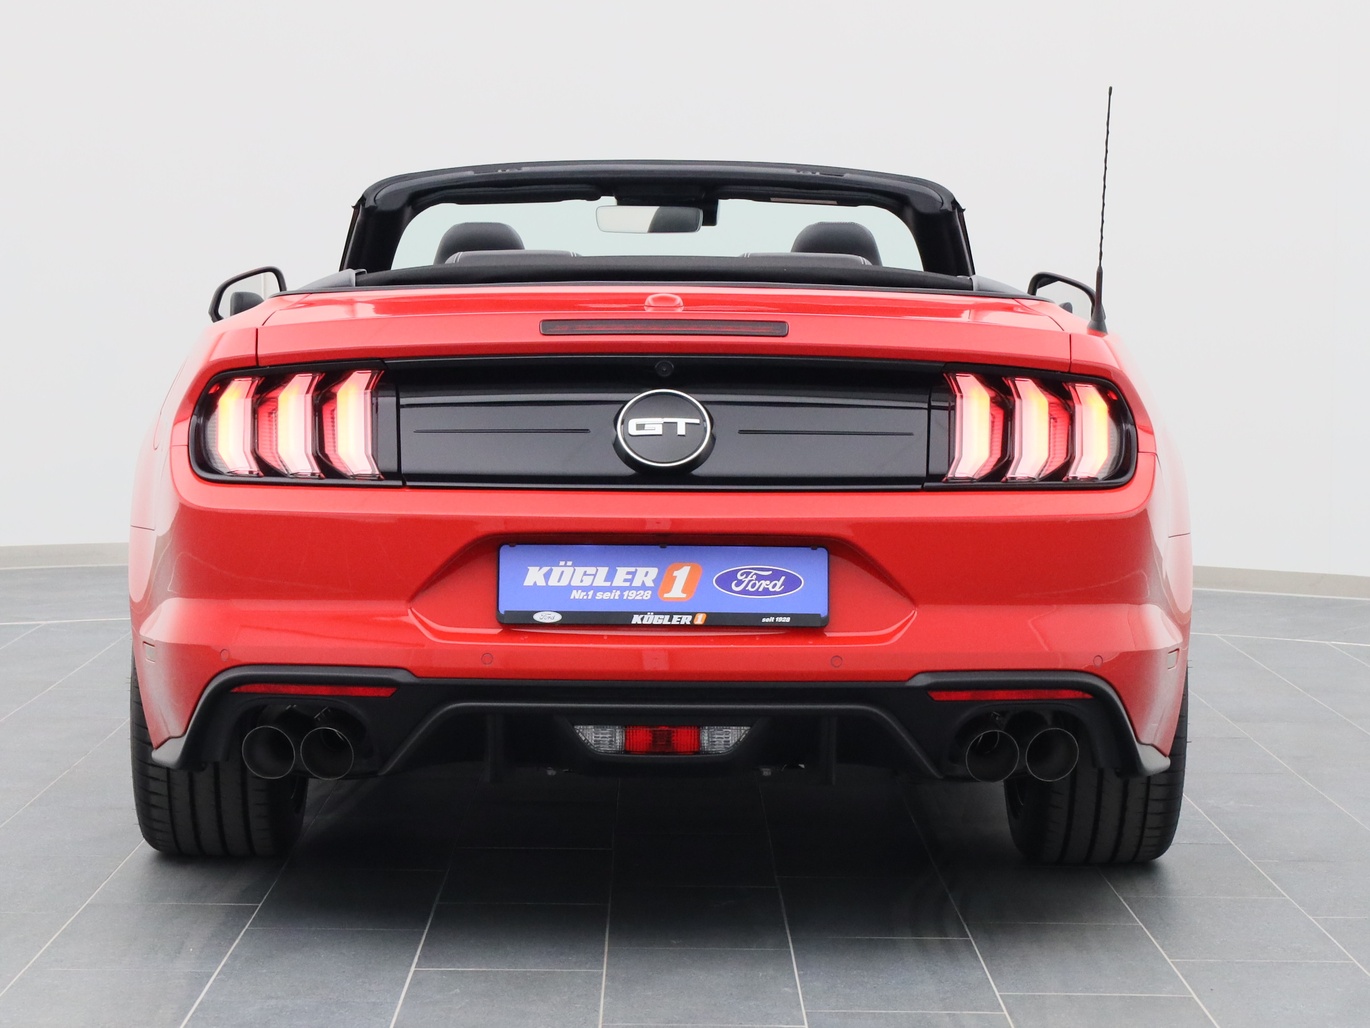 Heckansicht eines Ford Mustang GT Cabrio V8 450PS Aut. / Premium 2 in Race-rot 